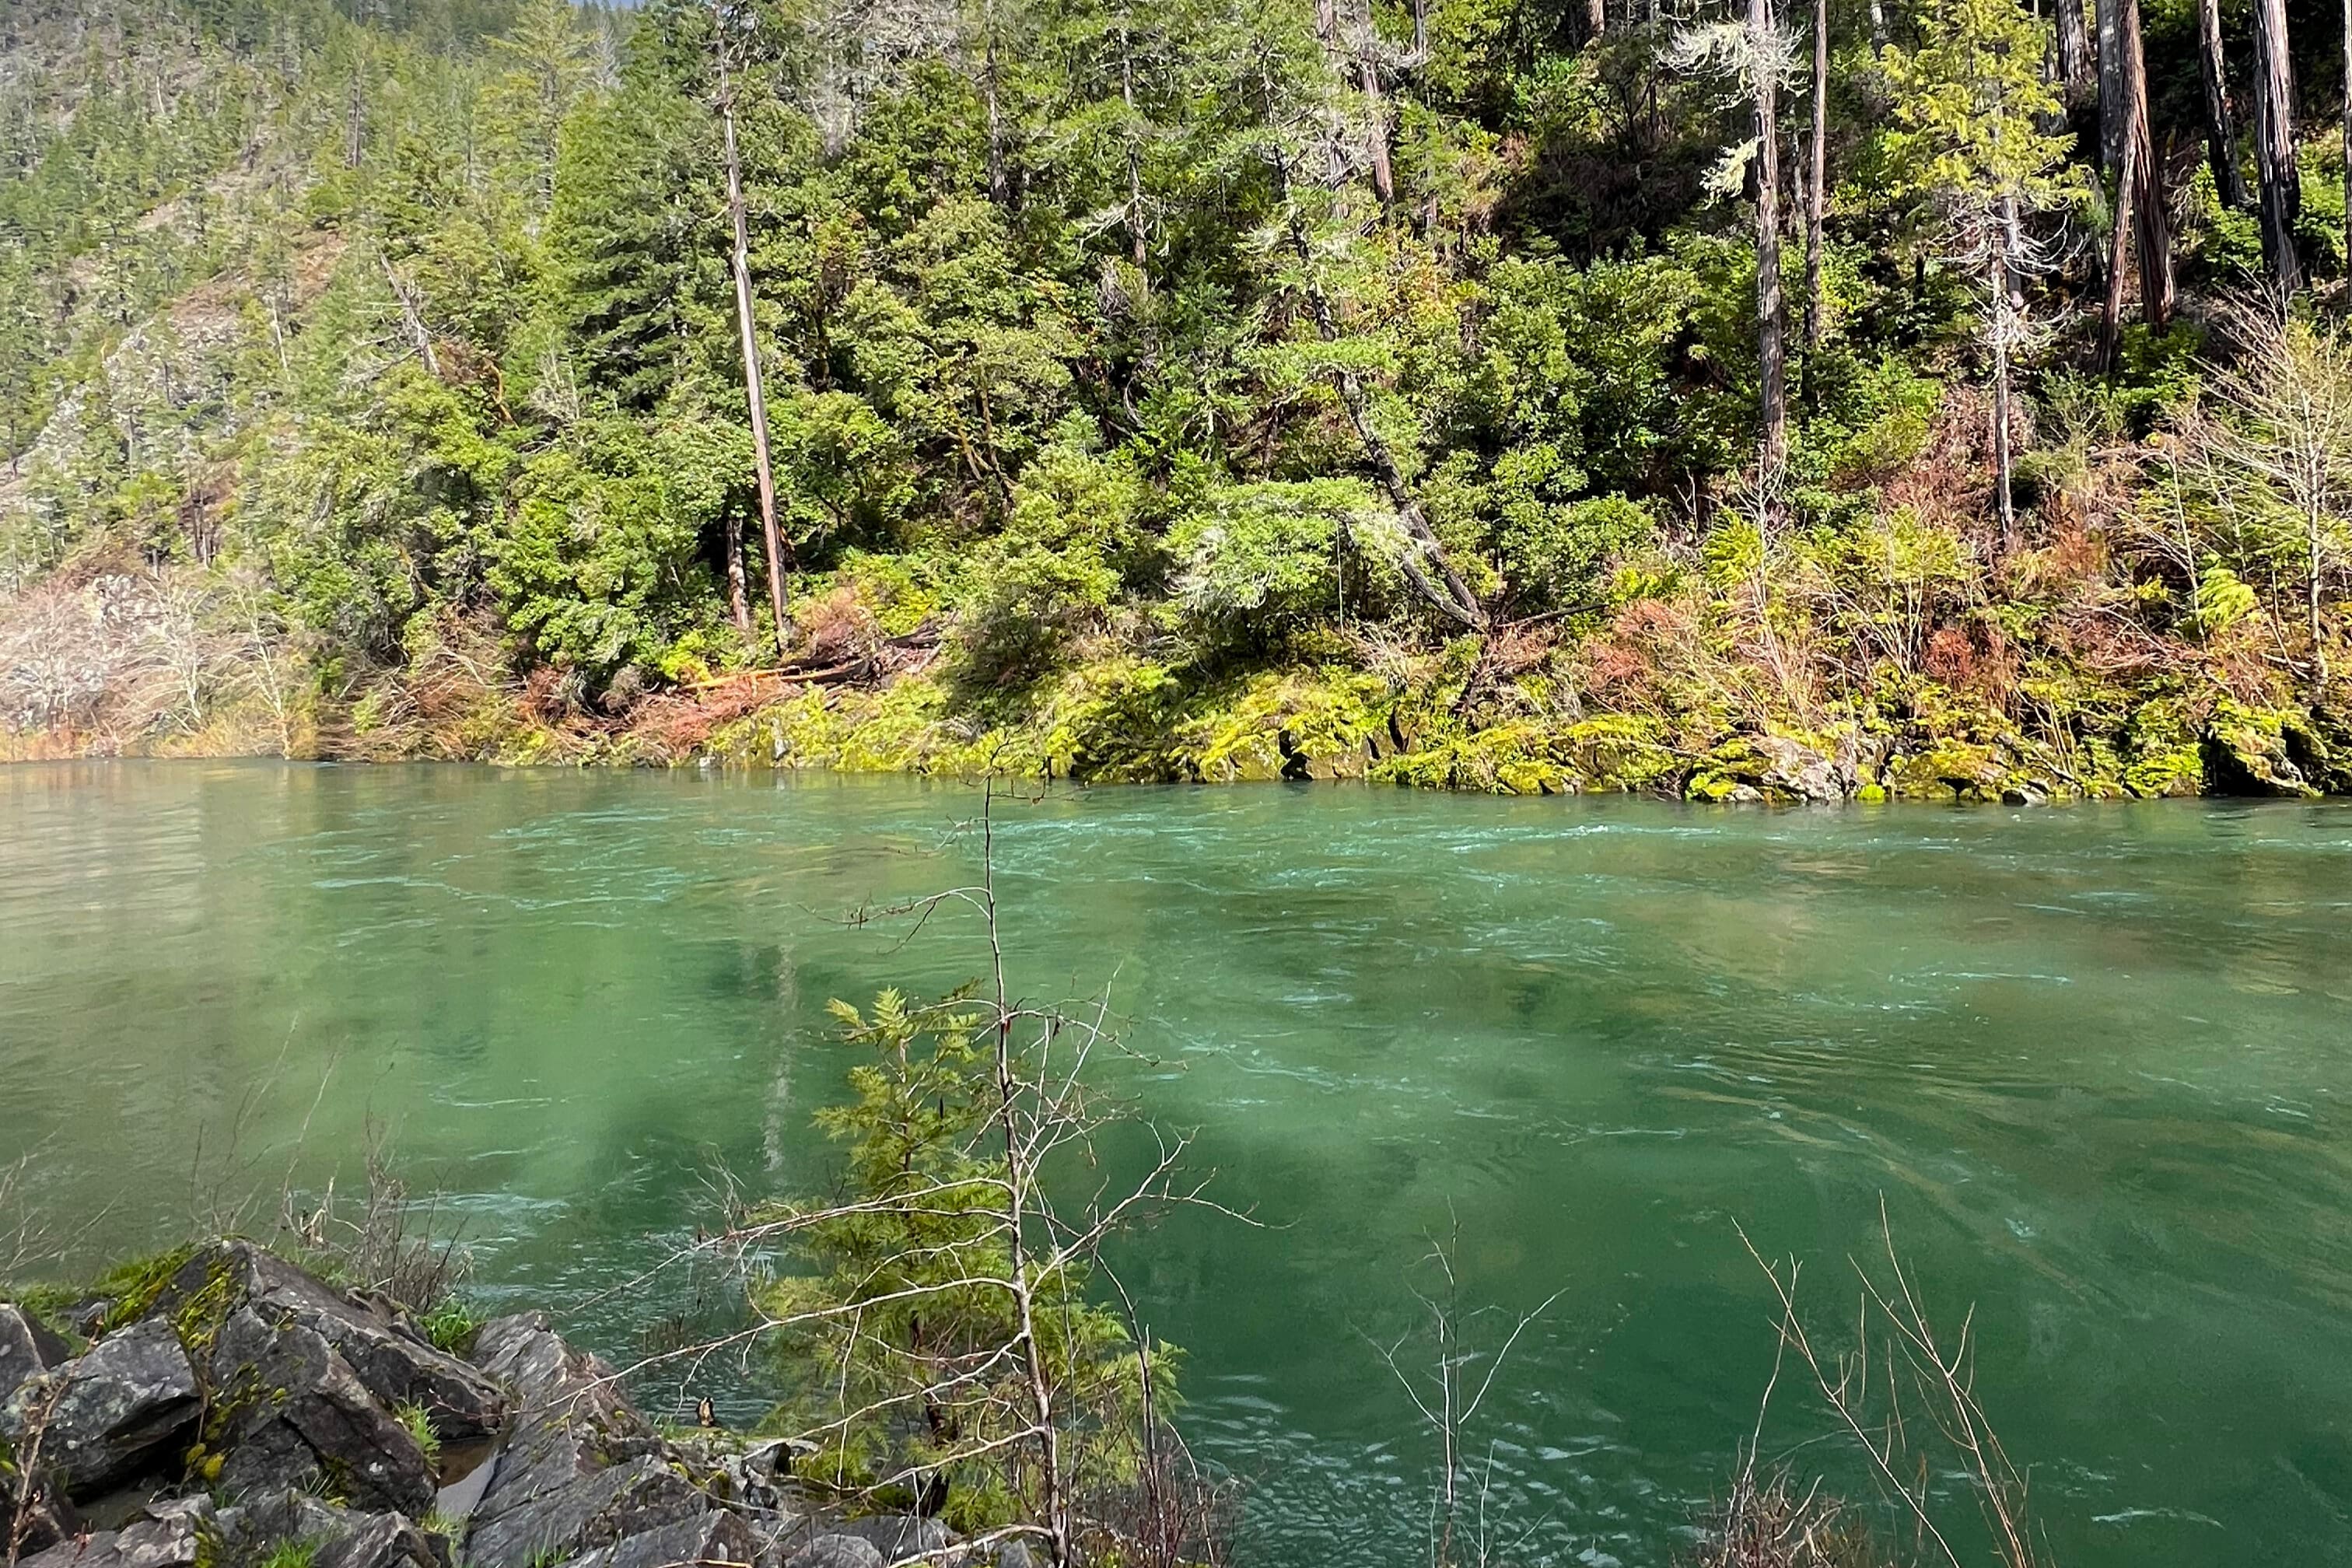 a photo of the Smith River from Jessica's travels to Northern California